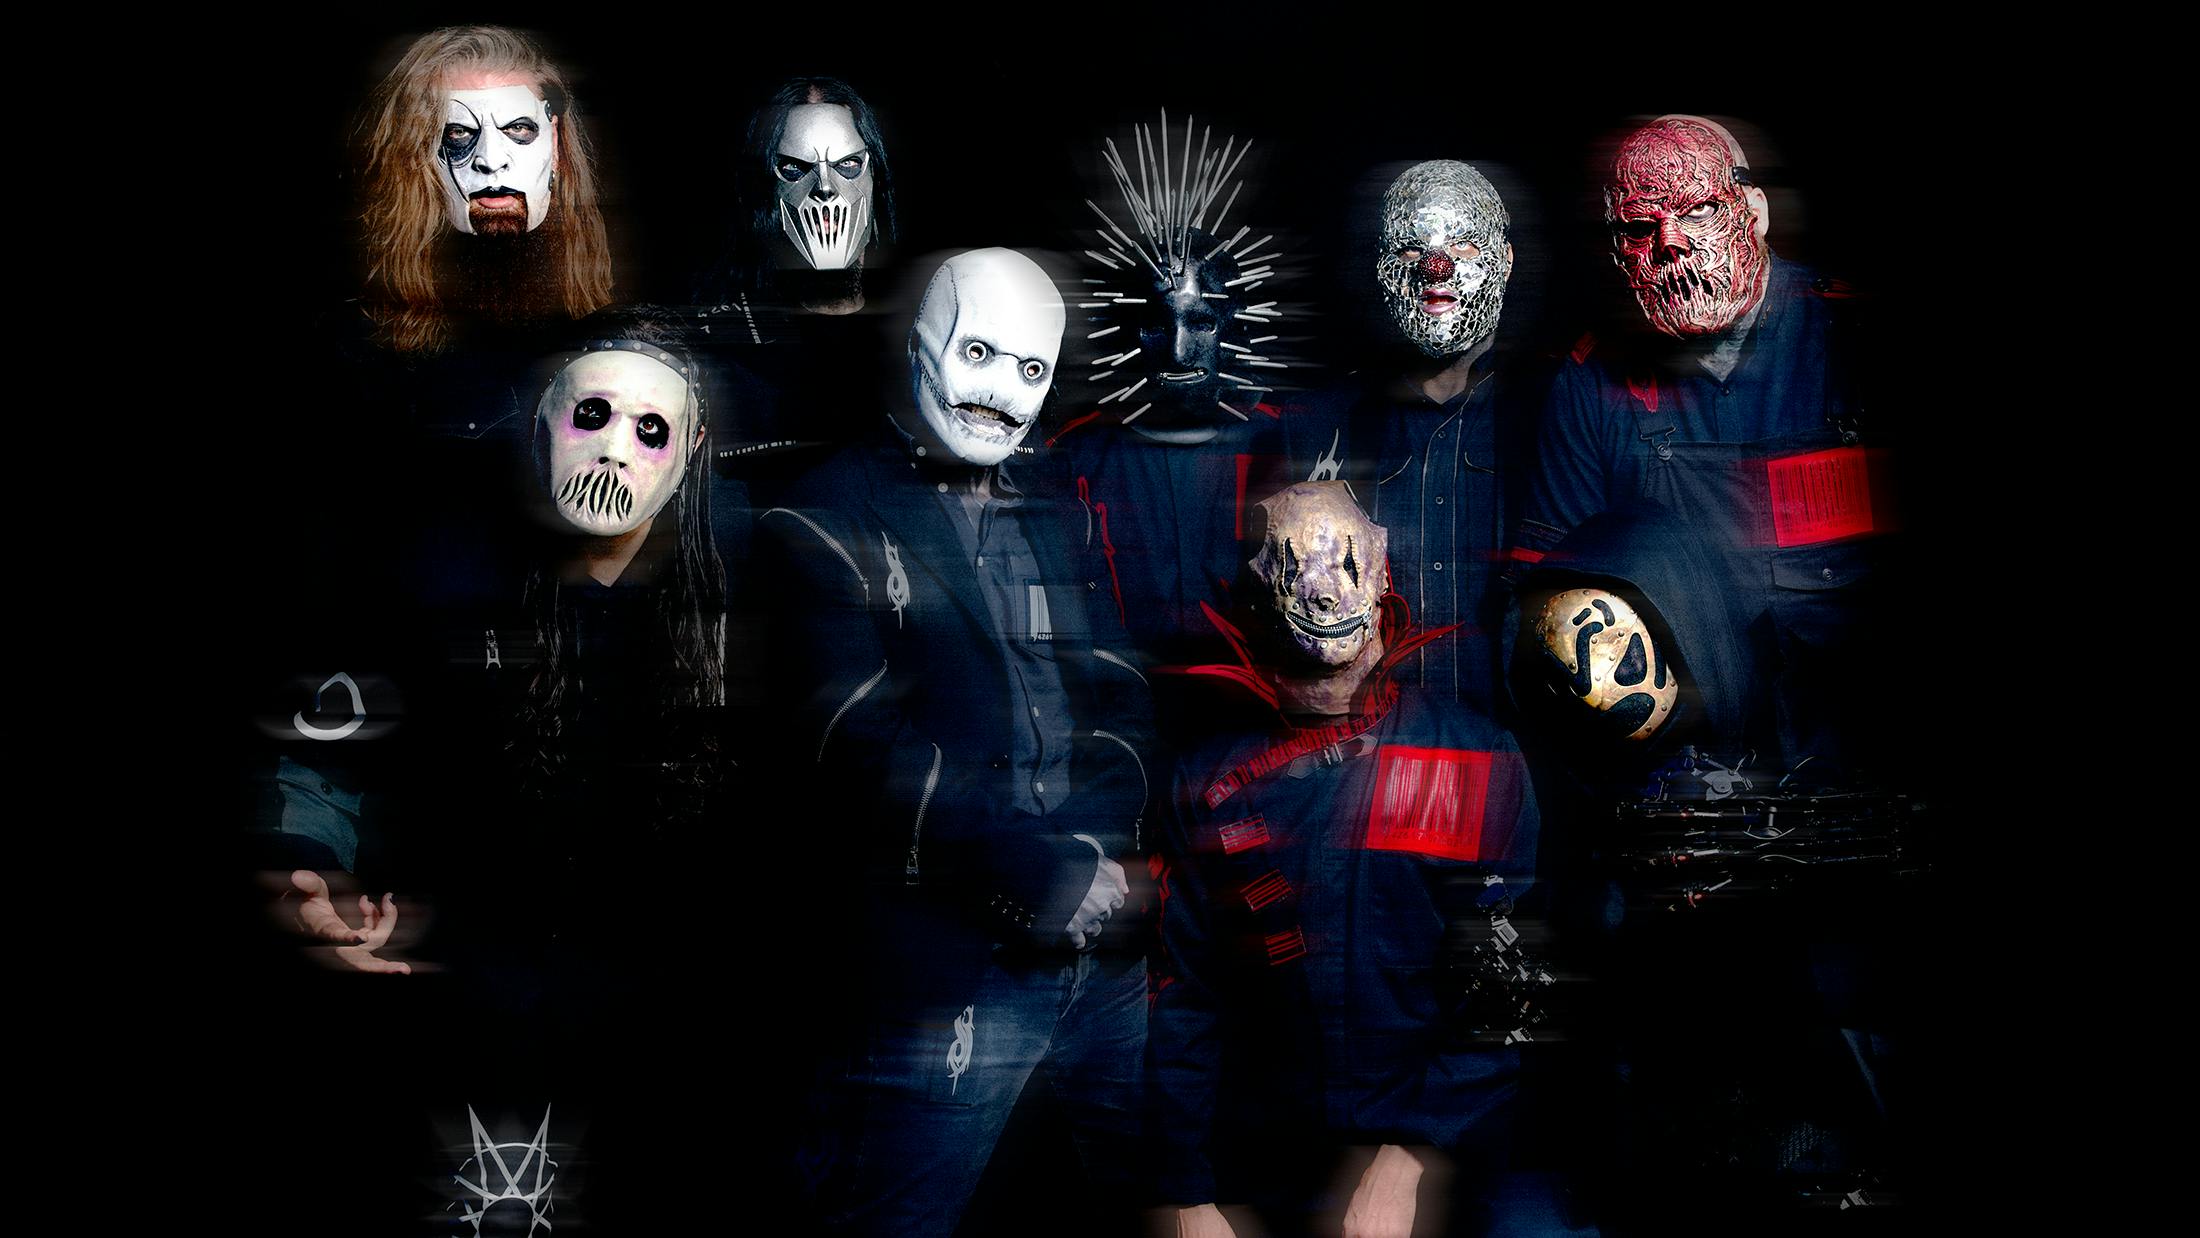 Slipknot: “After all these years, we’re still fans of each other”